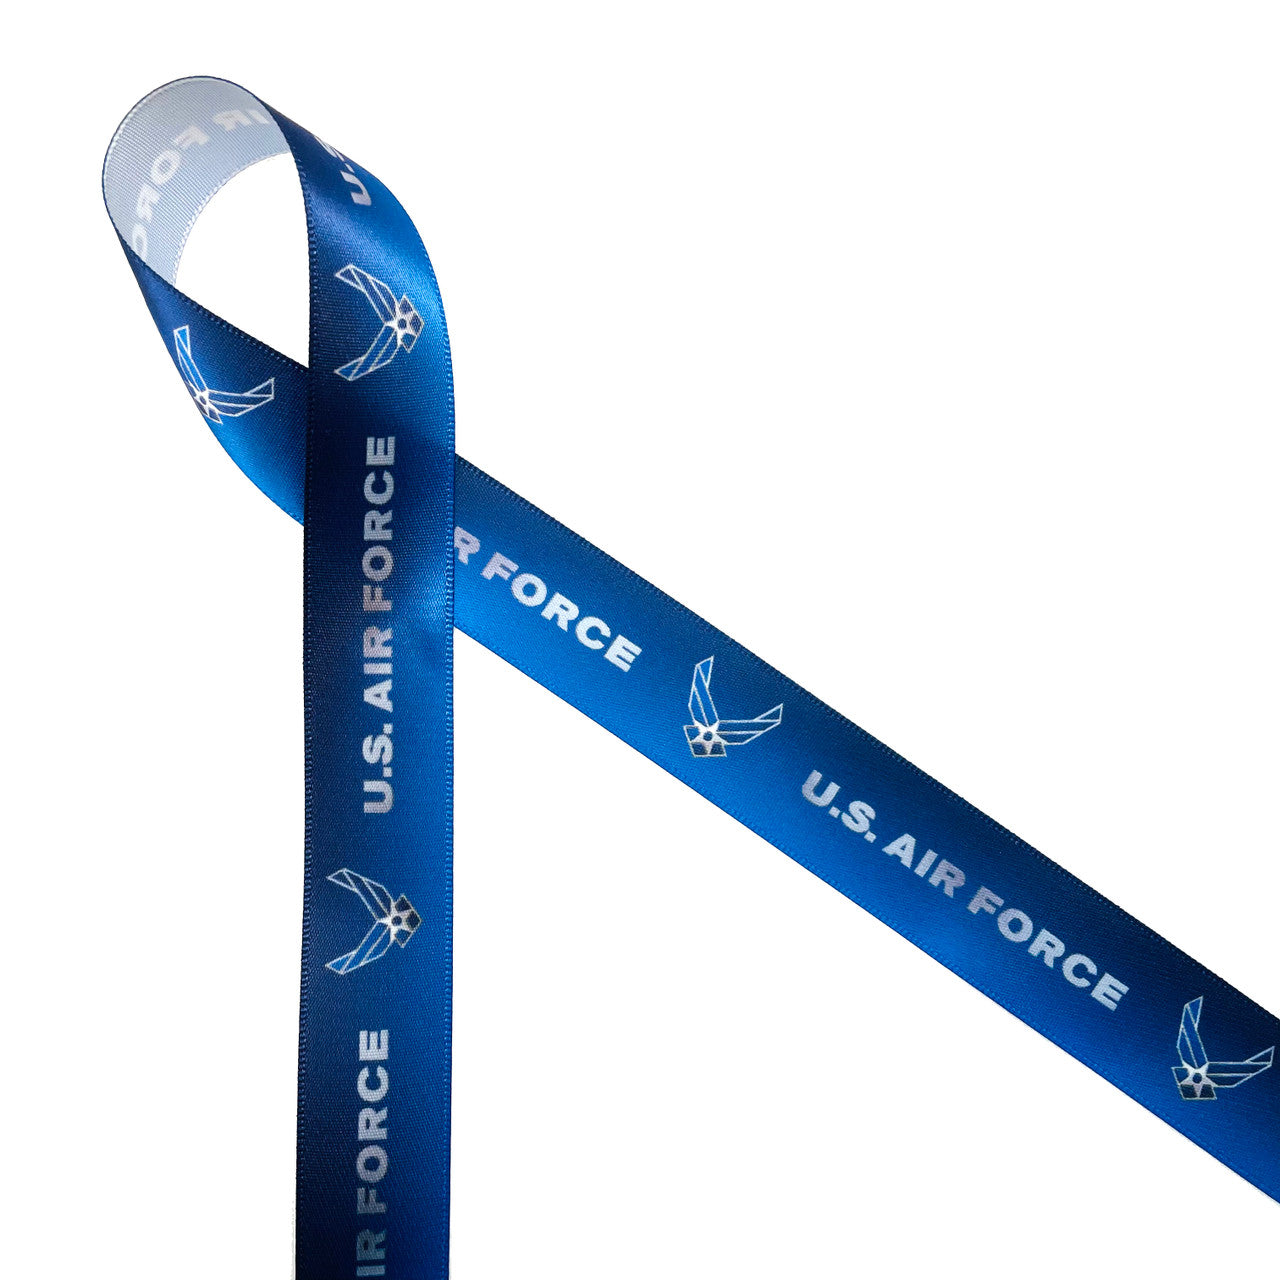 United States Air Force with the wings logo on a gradient blue background printed on 7/8" white single face satin ribbon is the ideal ribbon for celebrating your favorite airman. This is a great ribbon for Air Force academy events, retirement parties, deployment parties, gift wrap, gift baskets, party decor, crafts, sewing and quilting. All our ribbon is designed and printed in the USA